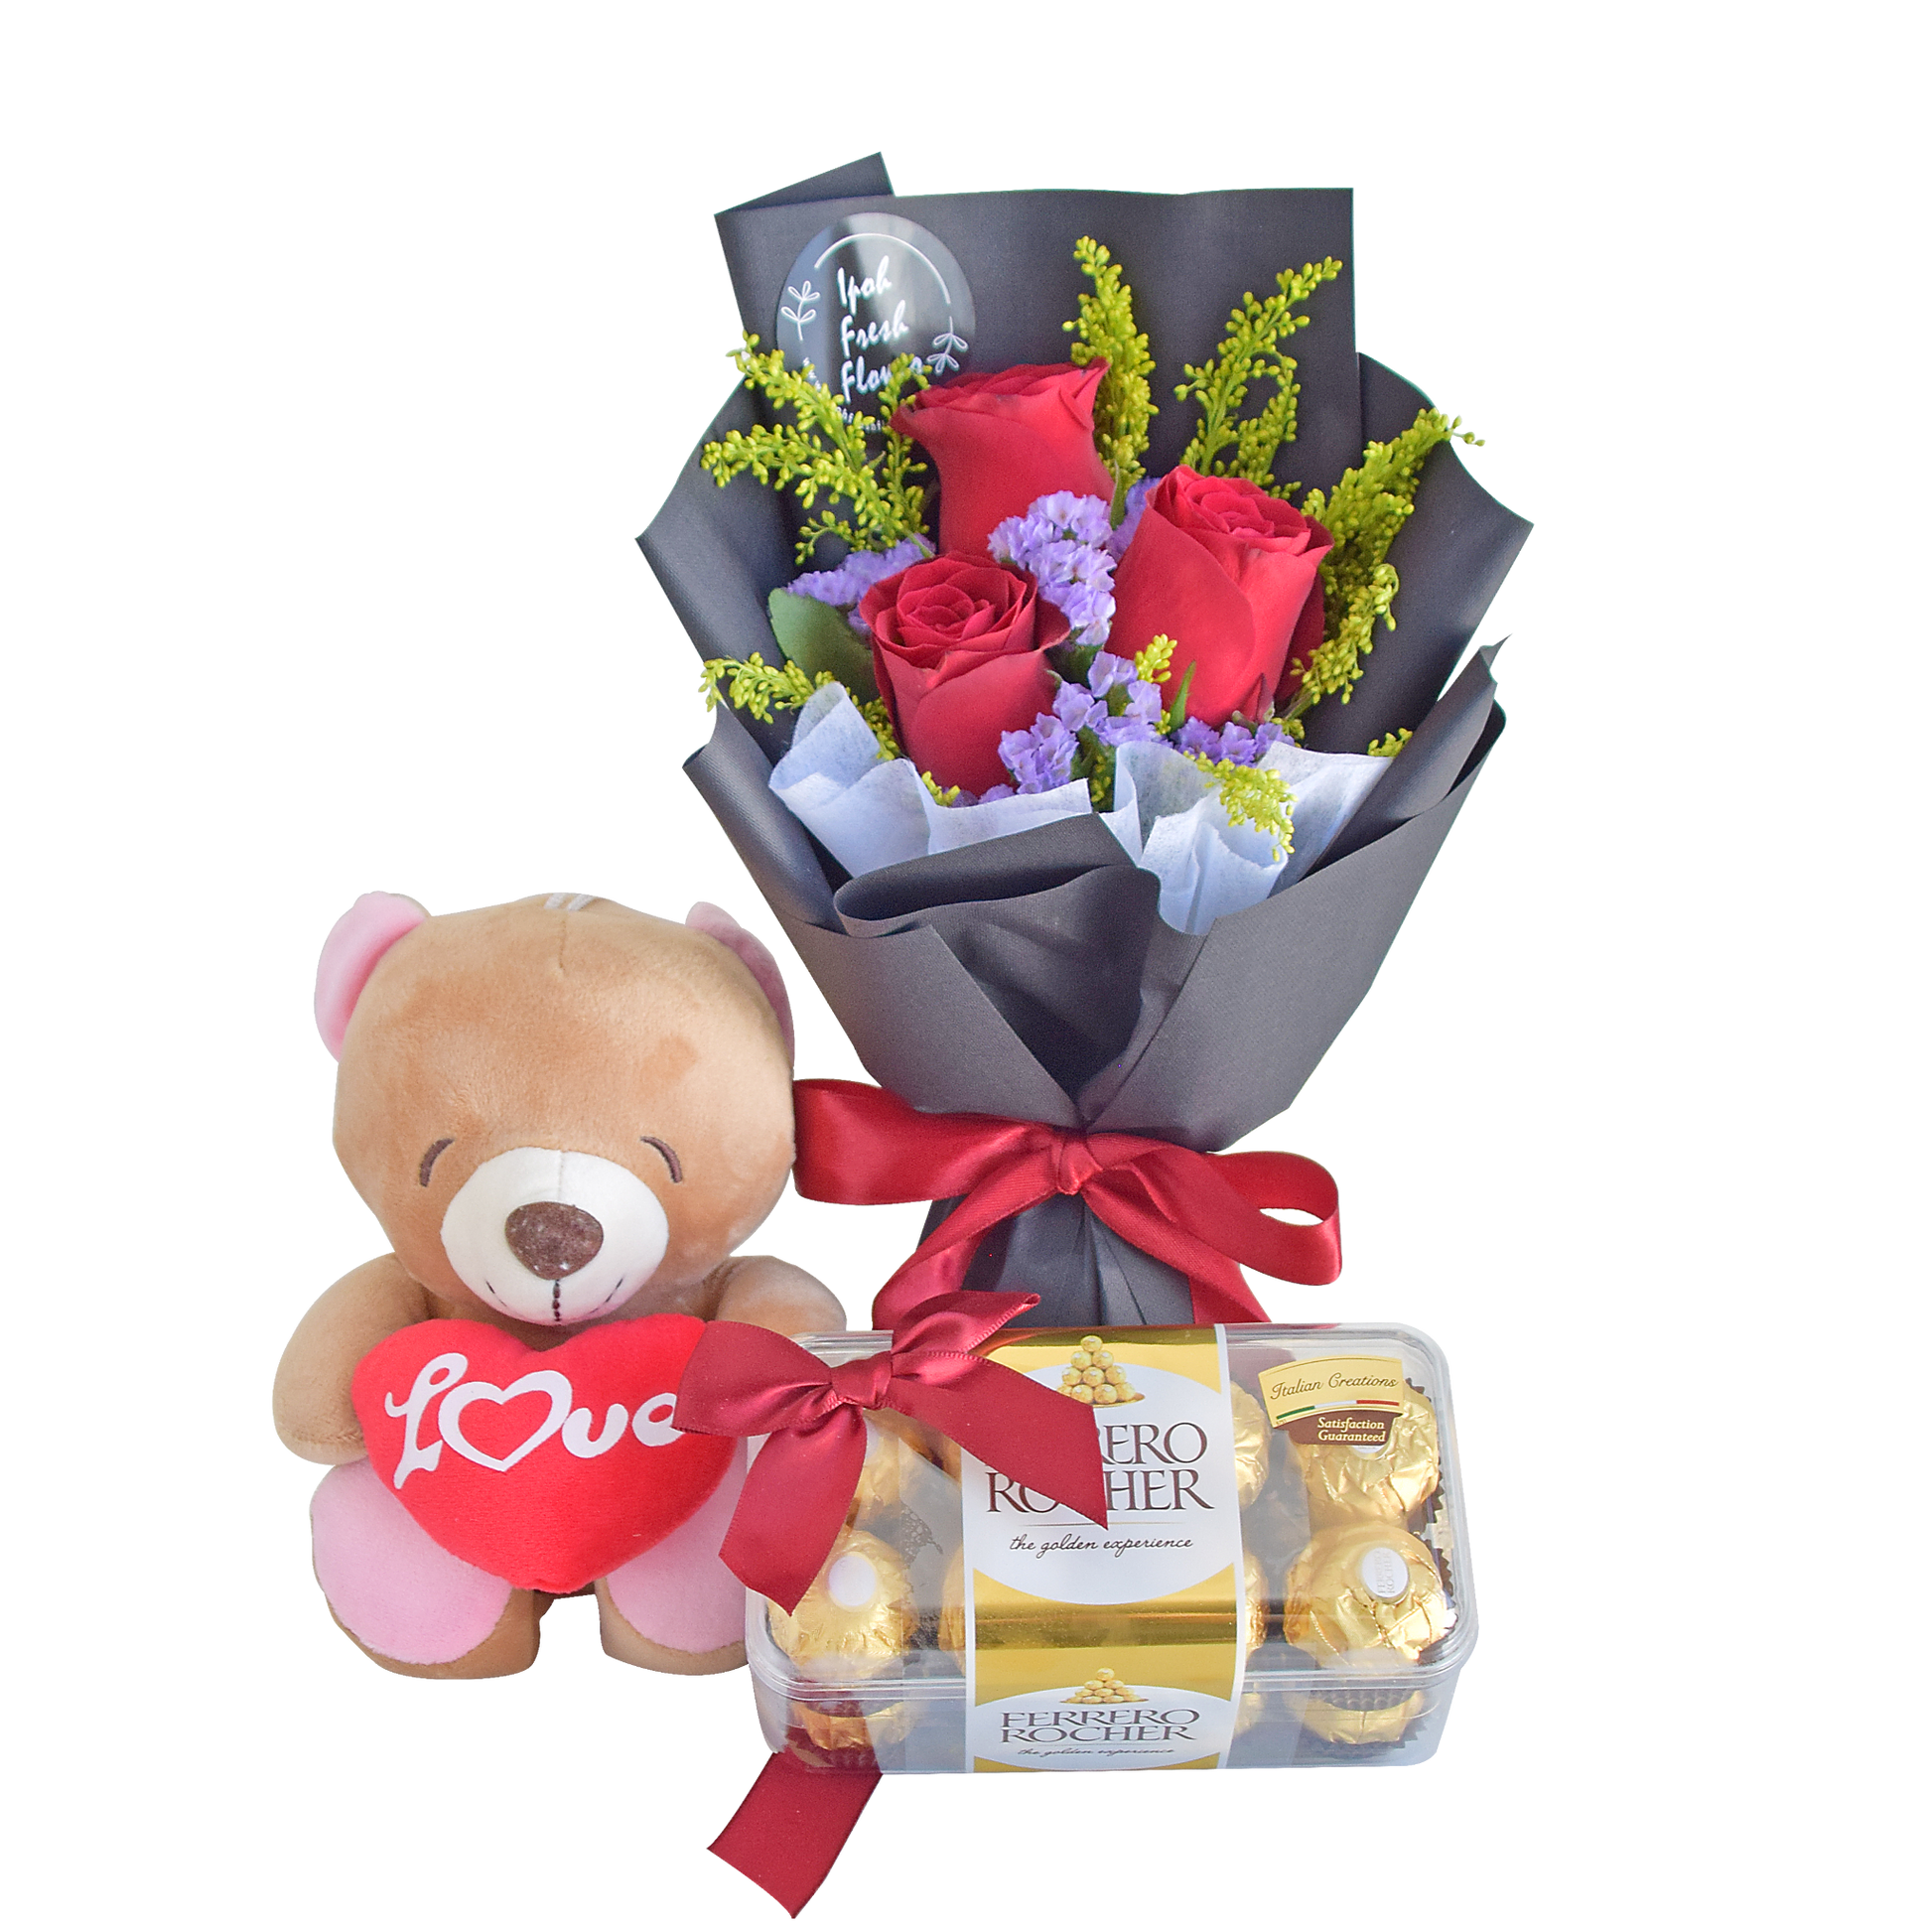 Be My Love Romantic Bundle| Fresh flower and gift delivery